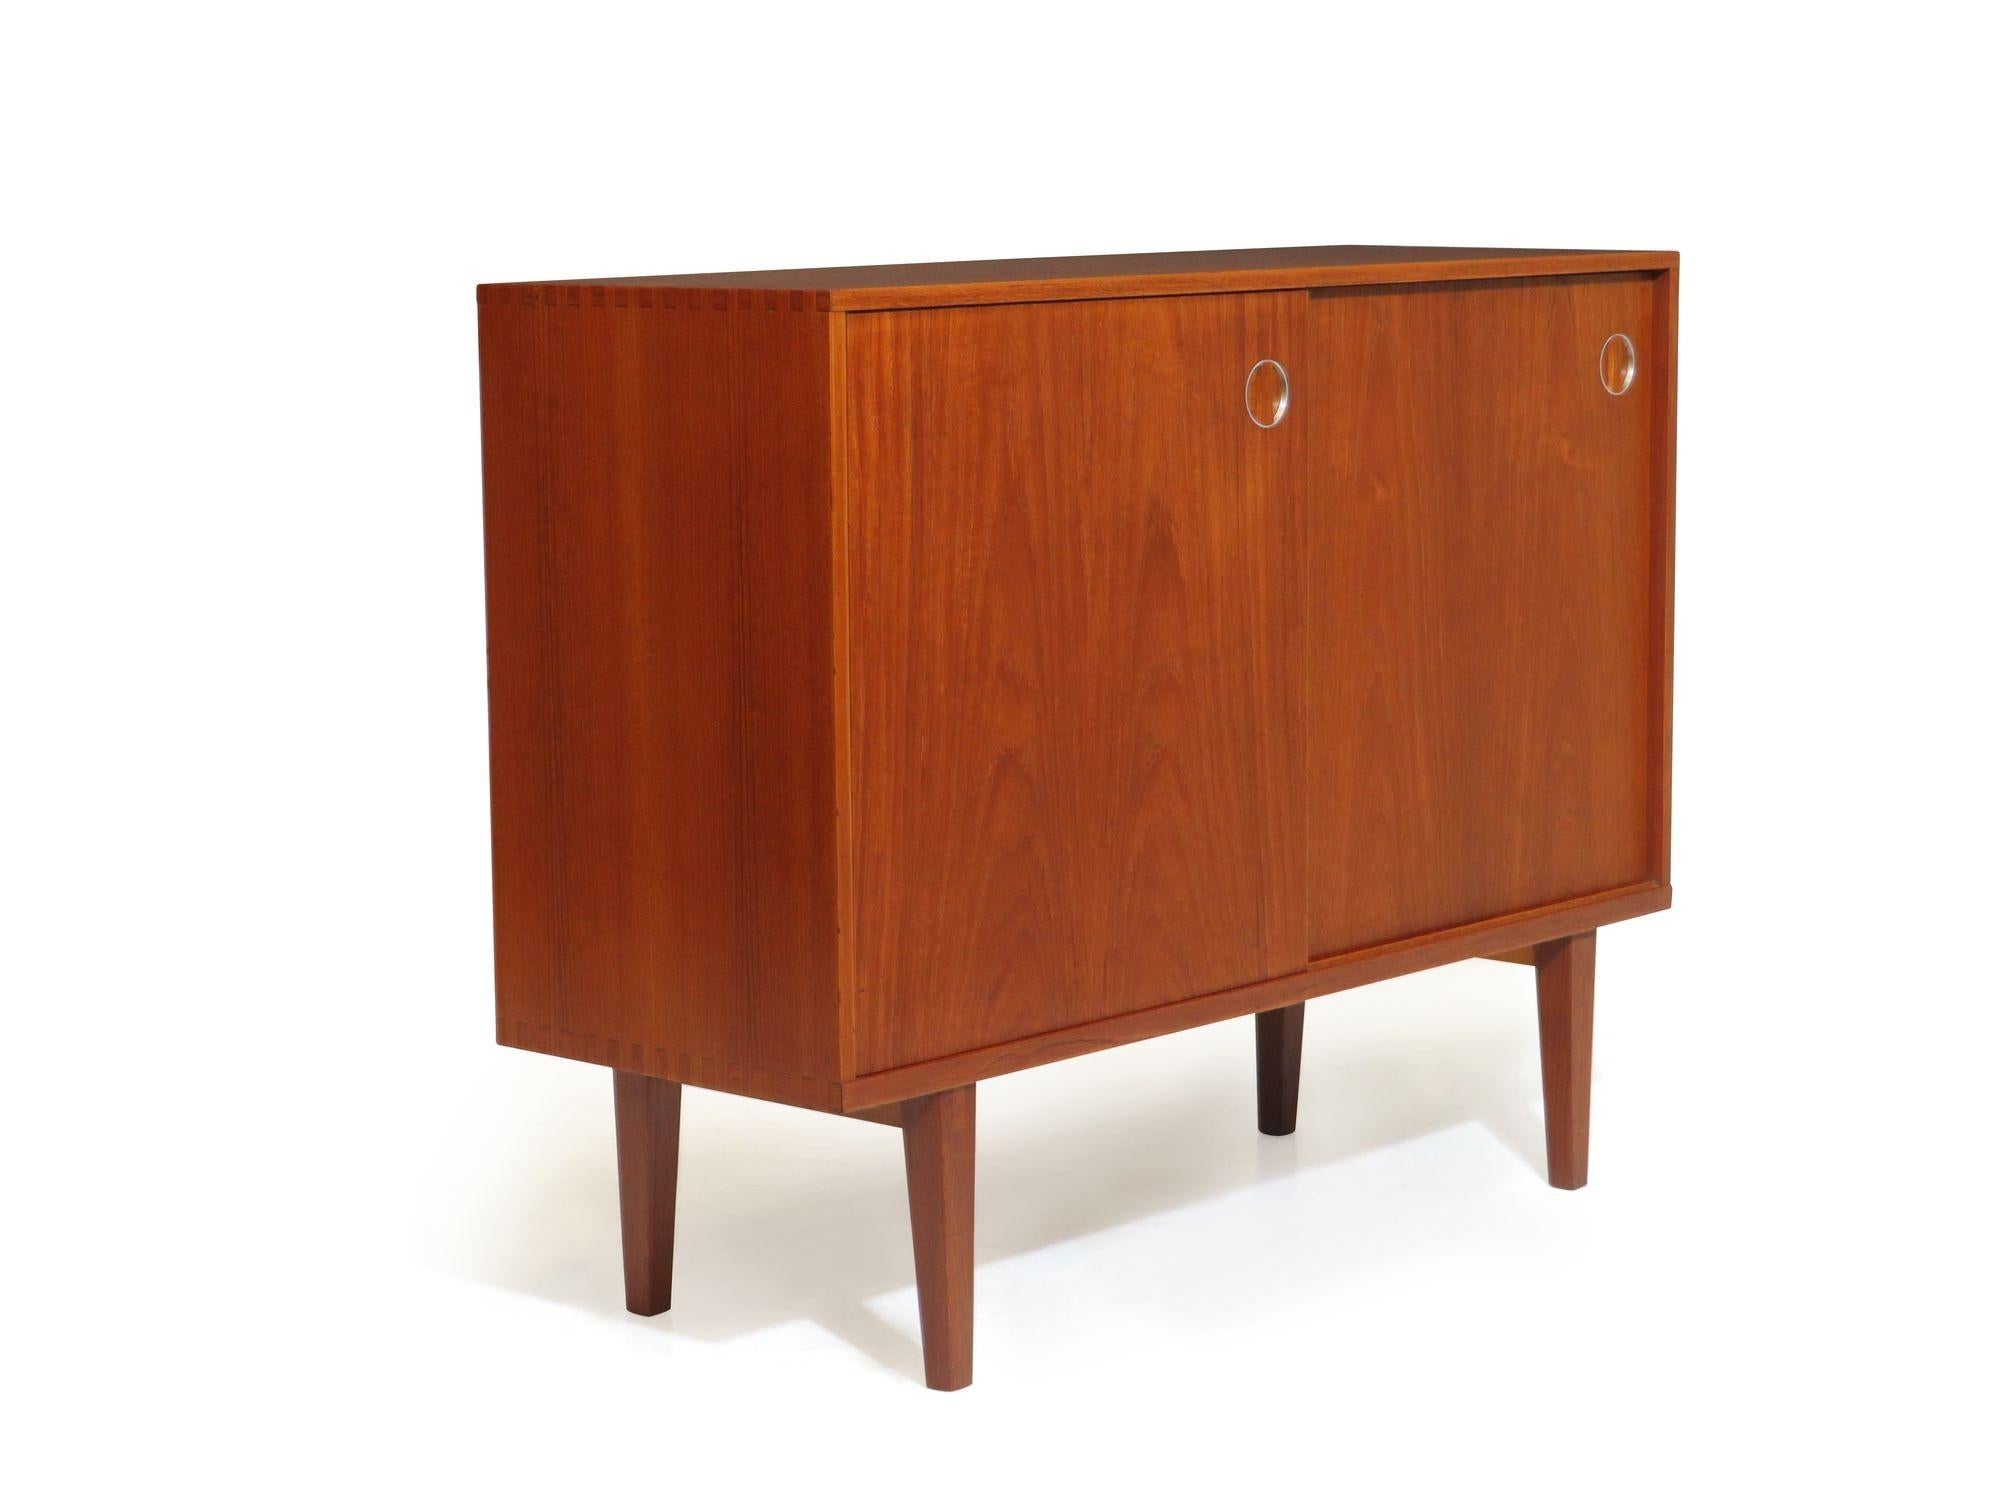 Mid Century Modern teak cabinet with pair of sliding doors with recessed oulls and metal details, adjustable interior shelves, and raised on tapered legs. Modest proportions make for a versatile cabinet appropriate as a night stand, media cabinet,